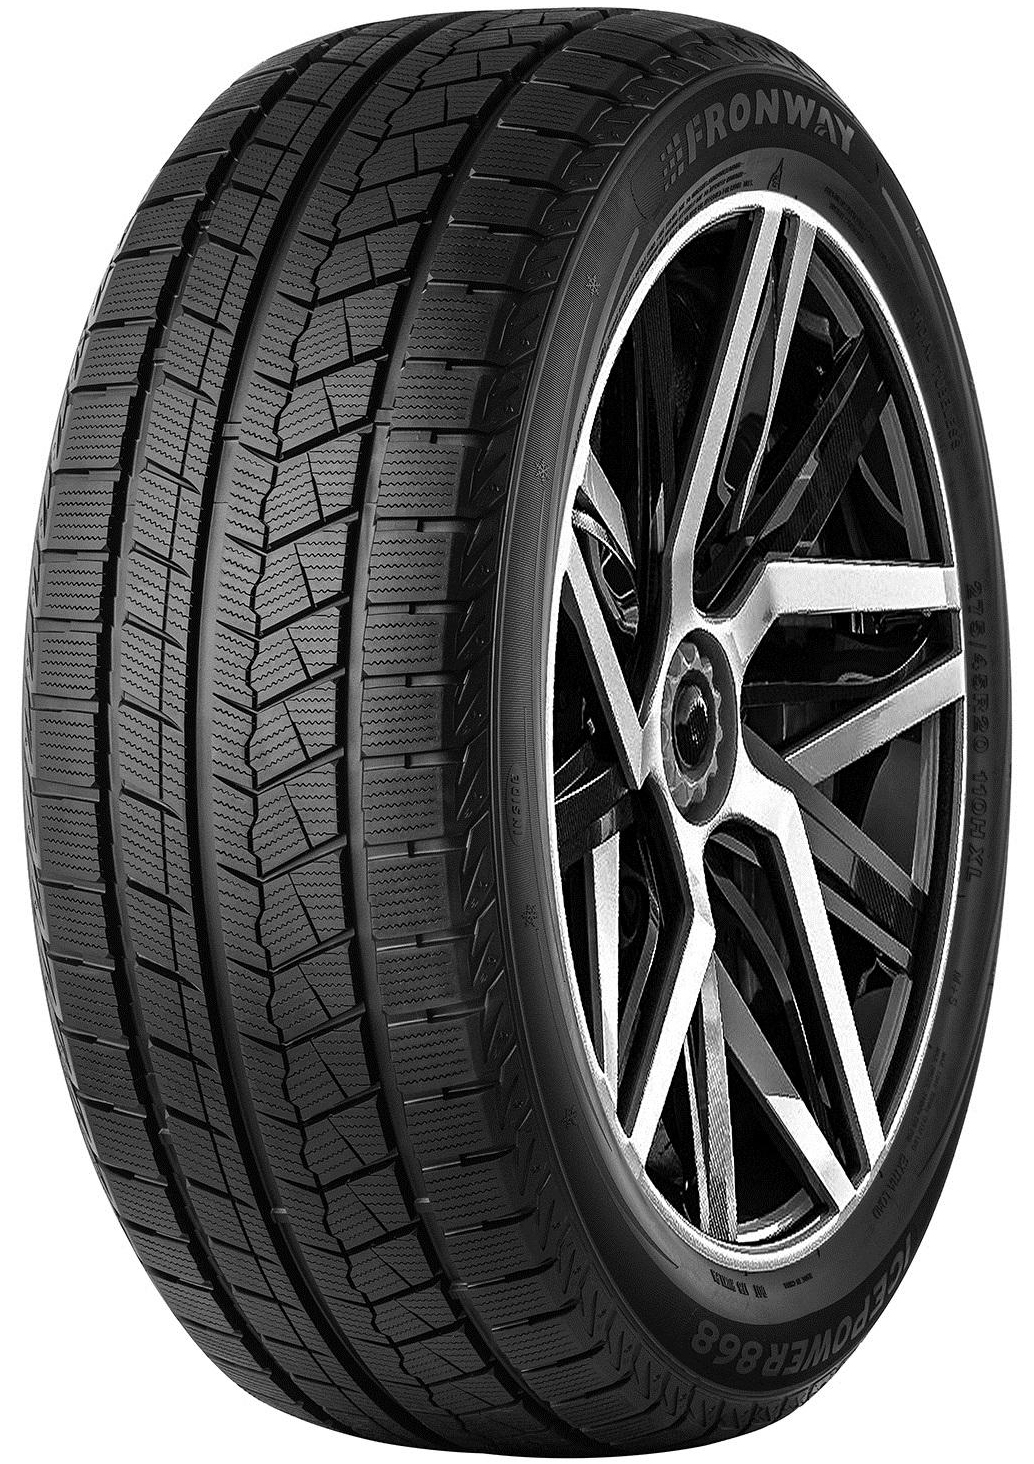    Fronway Icepower 868 225/50 R17 